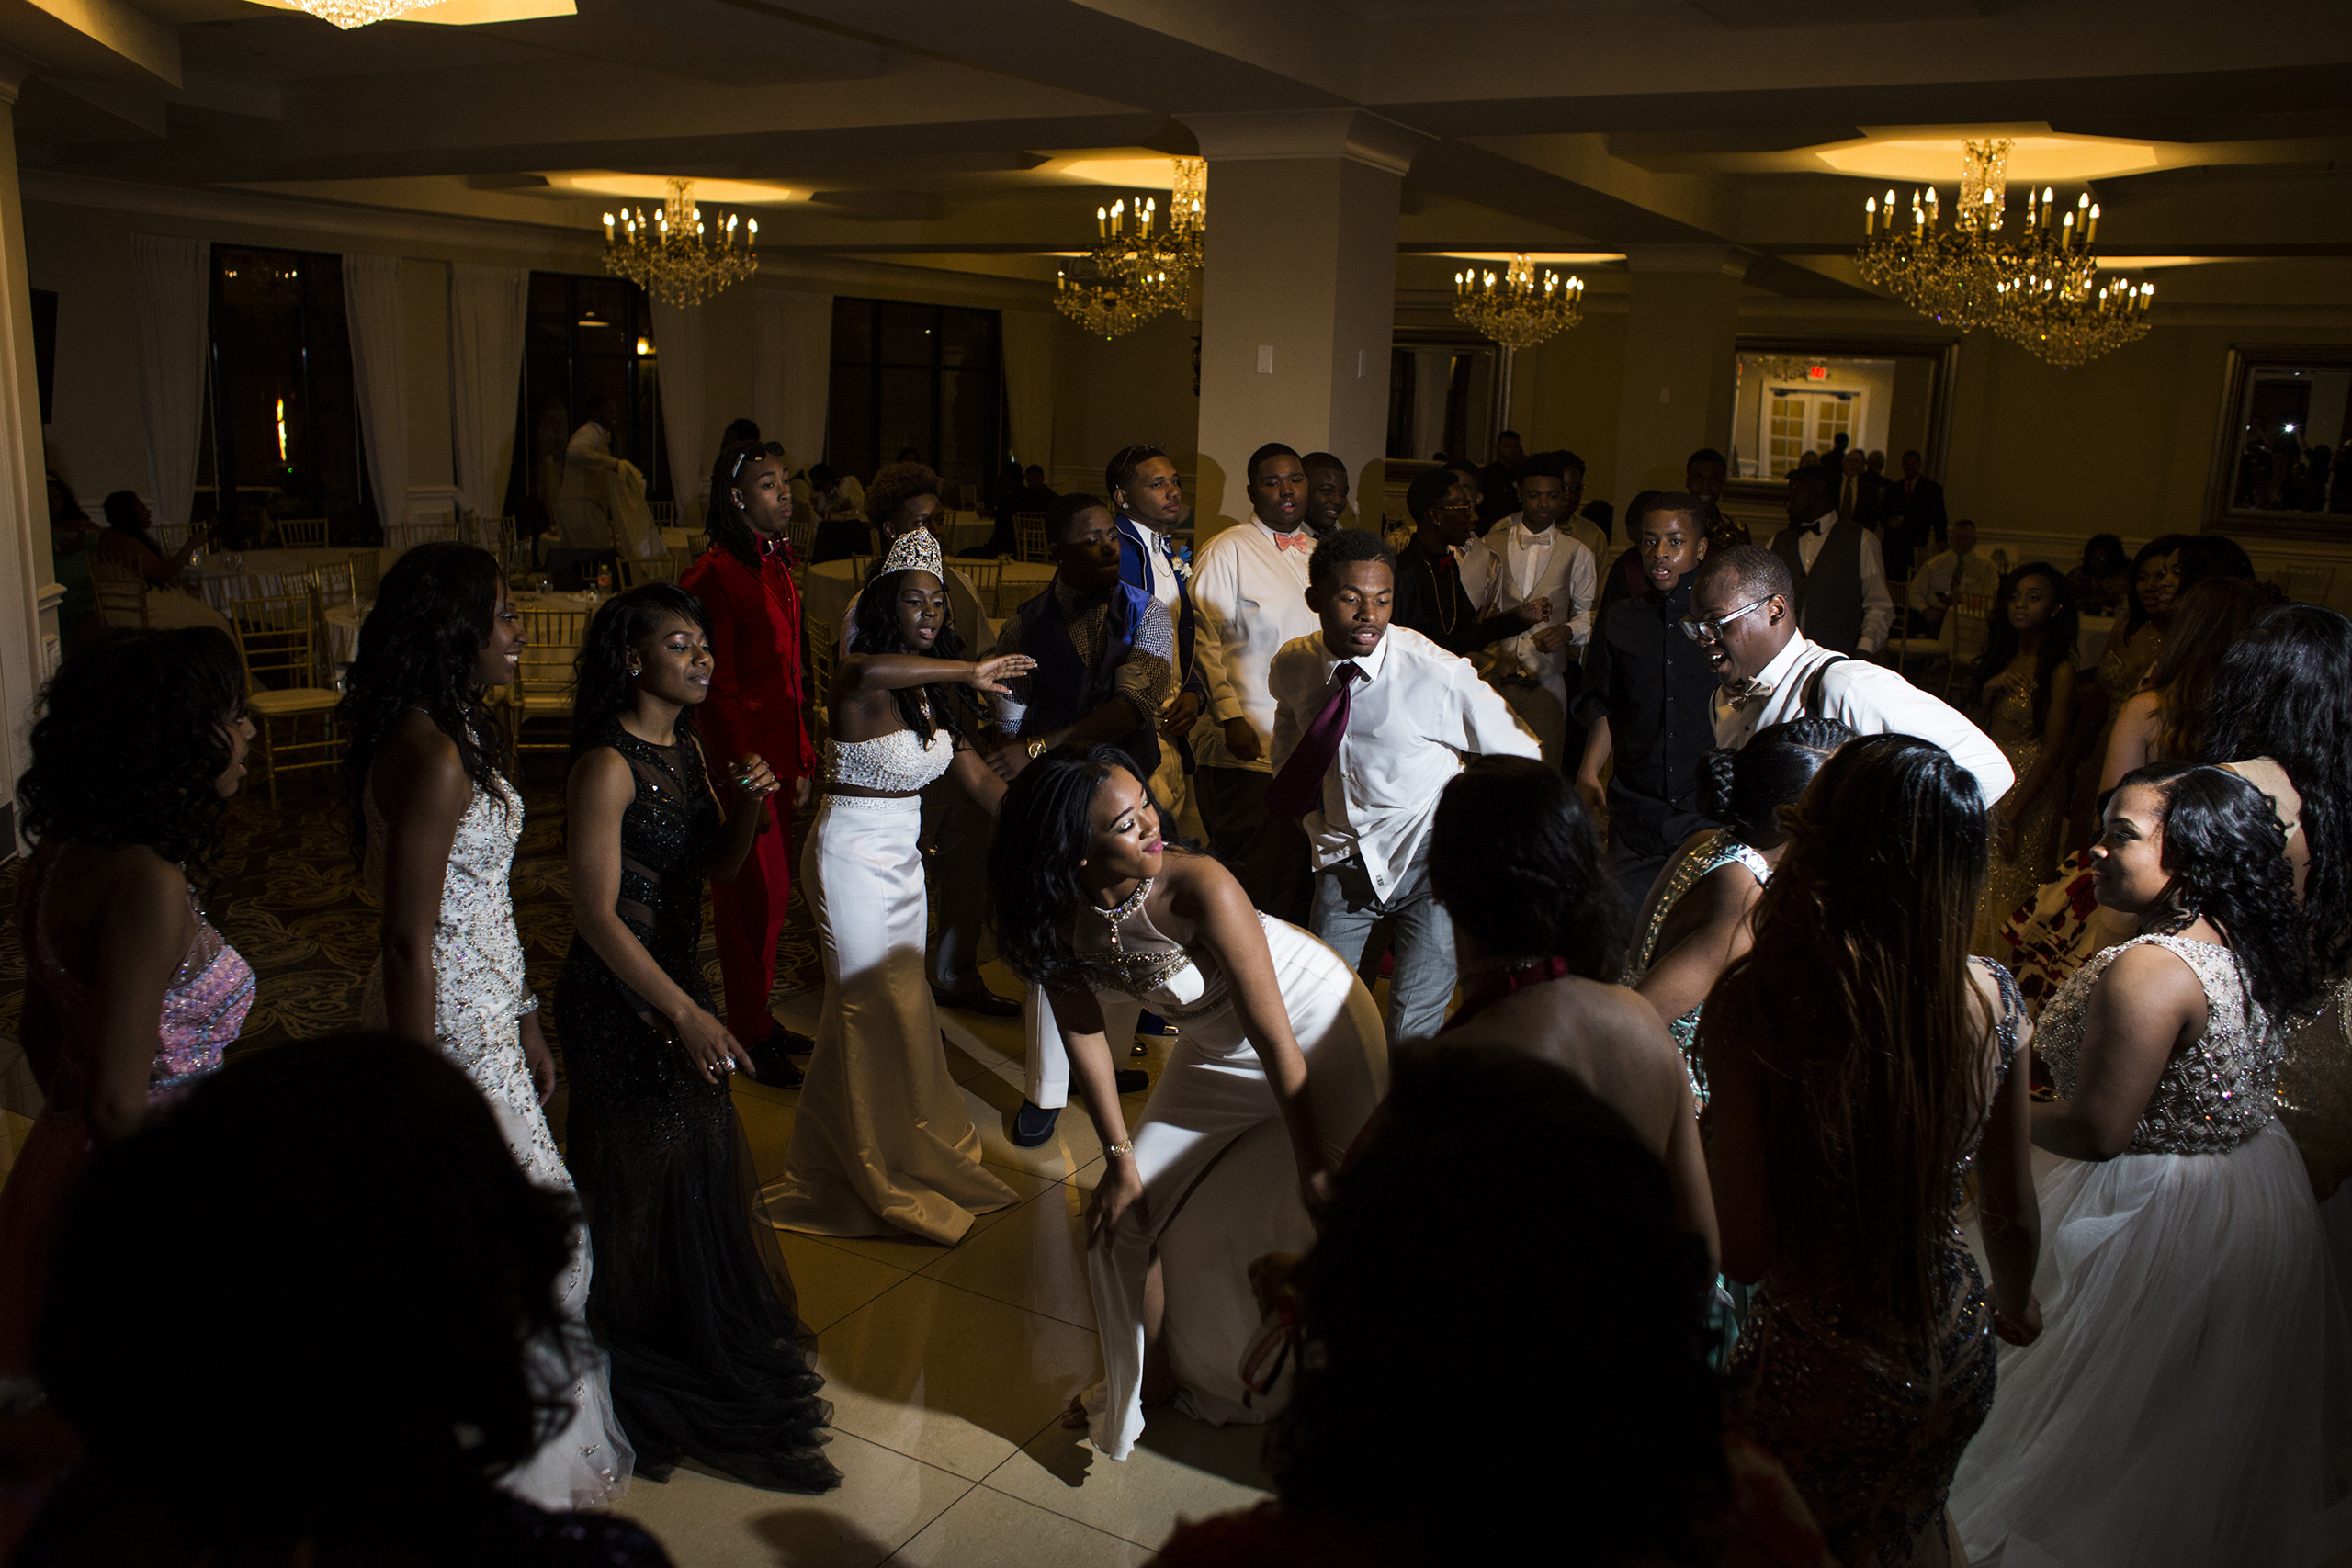 Students dance during a soul train line during prom at the Signature Chop House in Flushing, Mich., May 20, 2016.